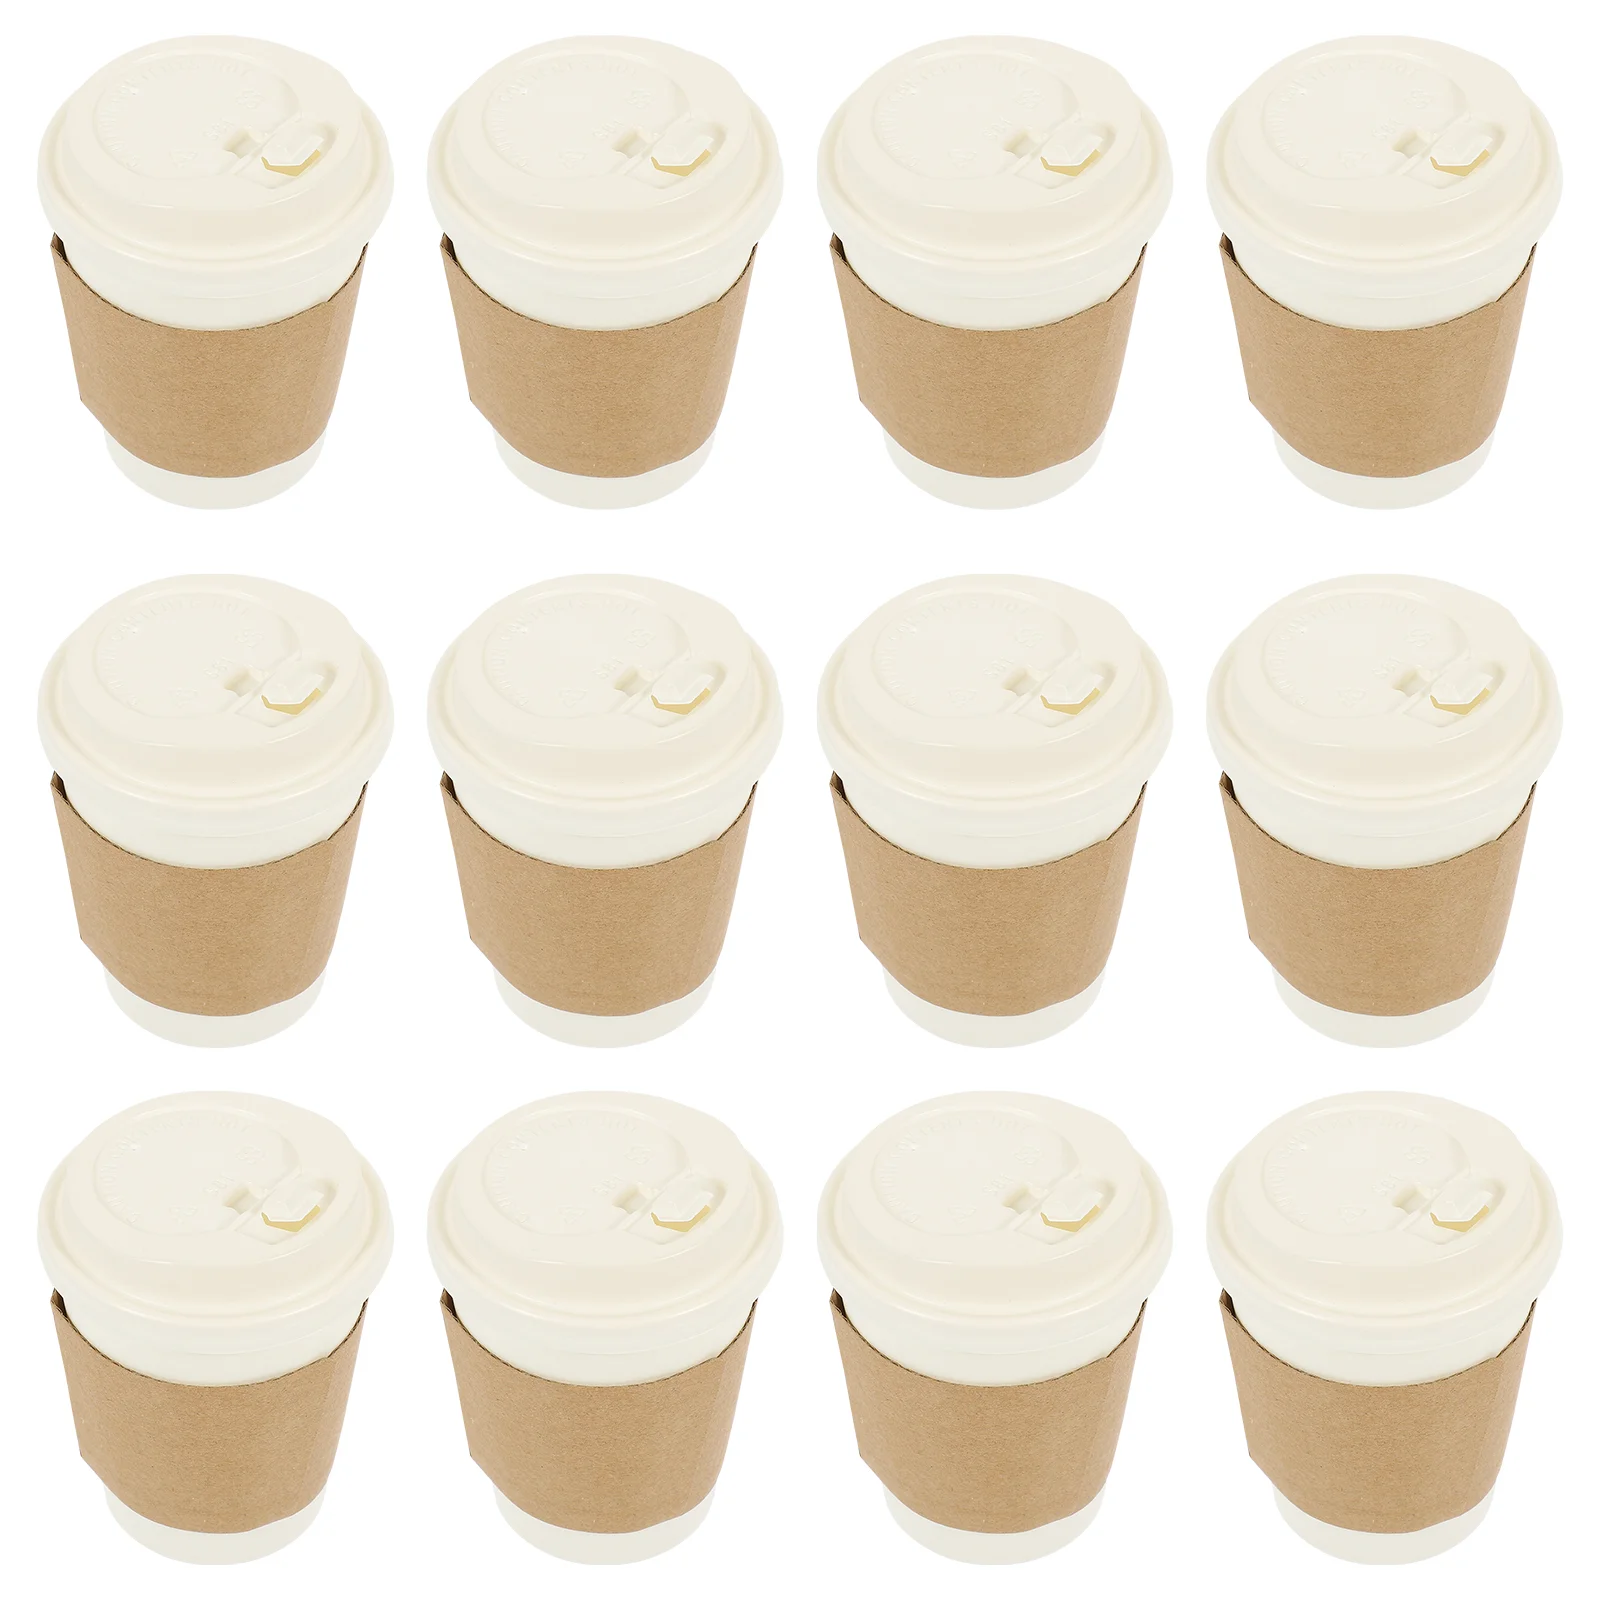 

Cups Paper Coffee Hot Disposable Cup Beveragelids Oz Mugs Espresso Drinks Forgo Togo Container Take Out Brown Sleeve Dome Drink